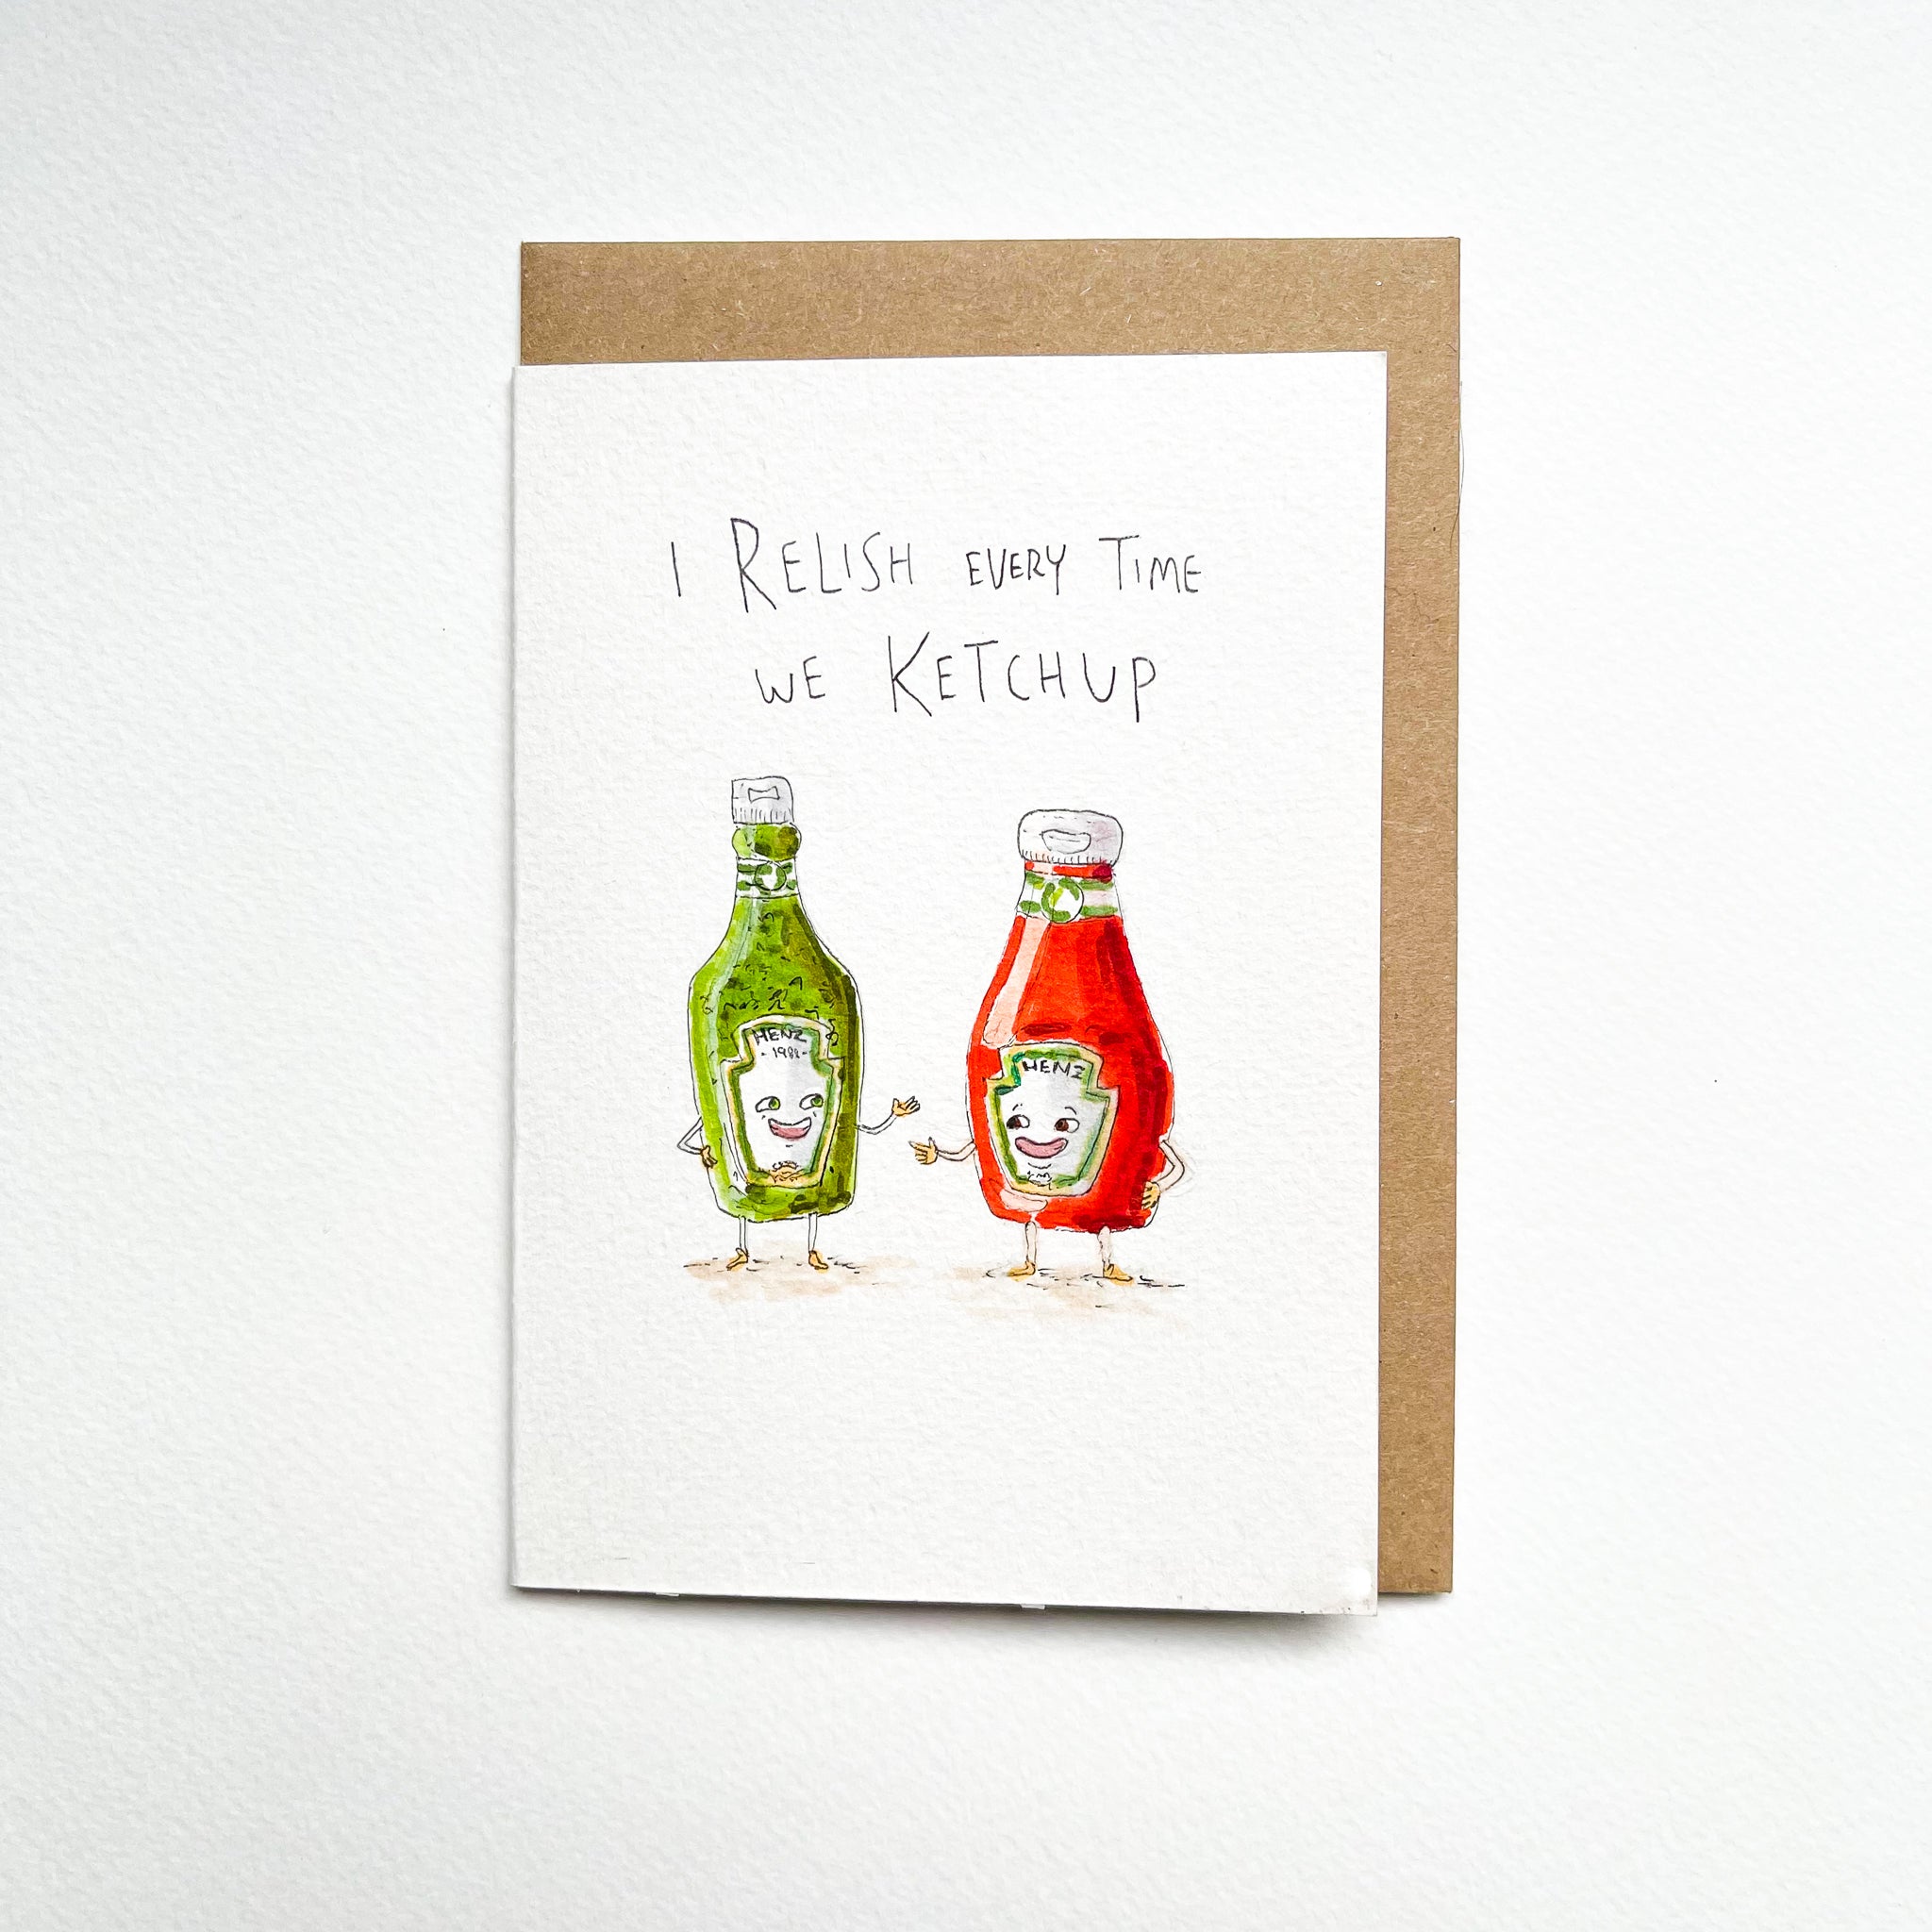 I Relish Every Time We Ketchup - Well Drawn